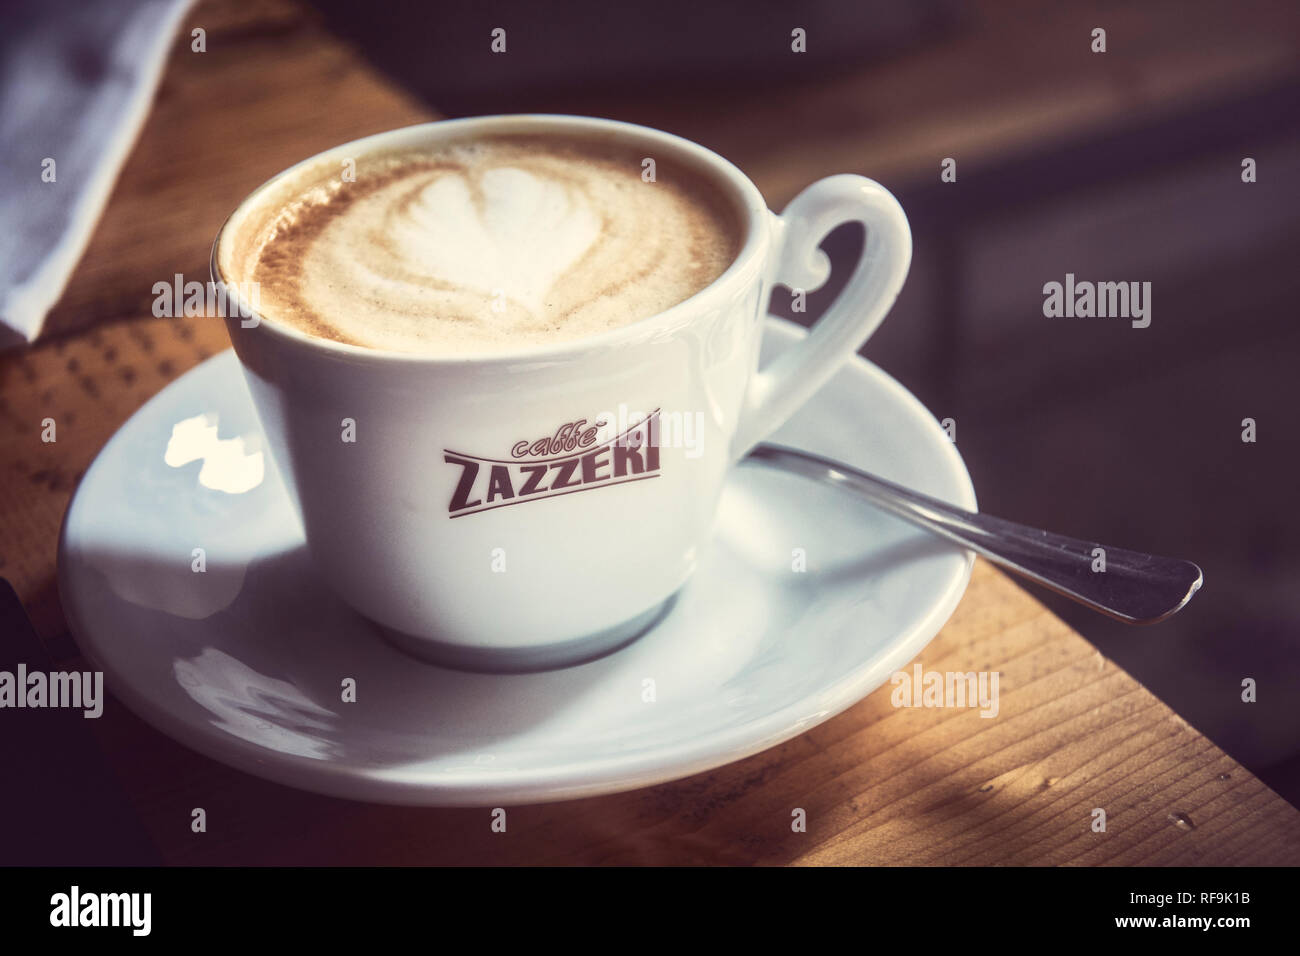 Latte art on coffee in the interior of a cafeteria called 'Caffe Zazzeri' in the city of Florence, Italy. Stock Photo